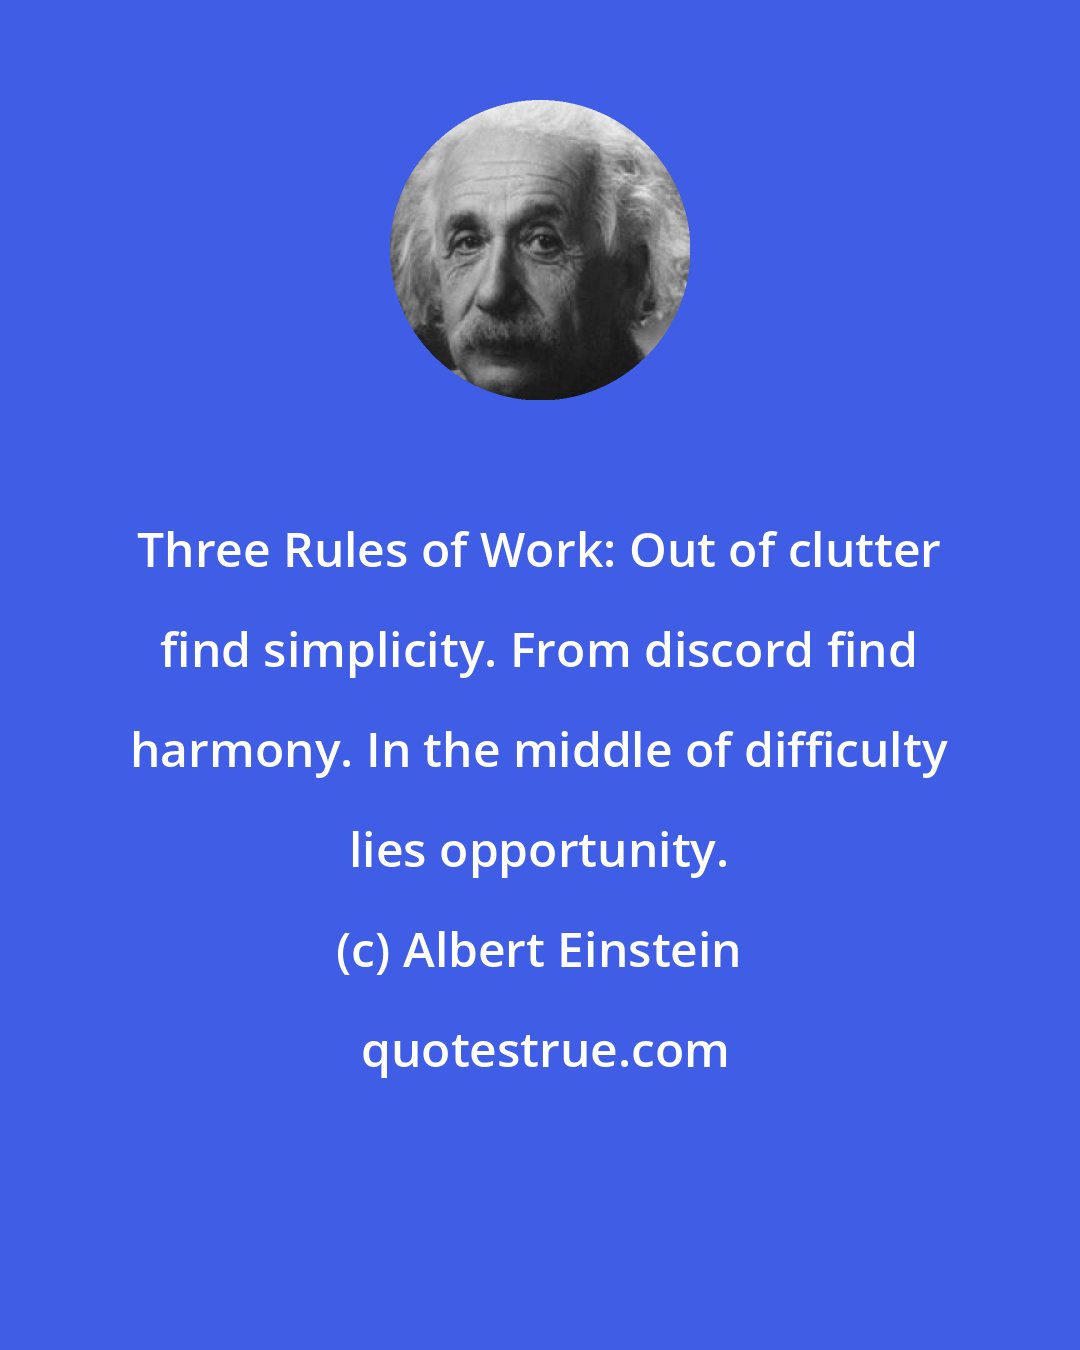 Albert Einstein: Three Rules of Work: Out of clutter find simplicity. From discord find harmony. In the middle of difficulty lies opportunity.